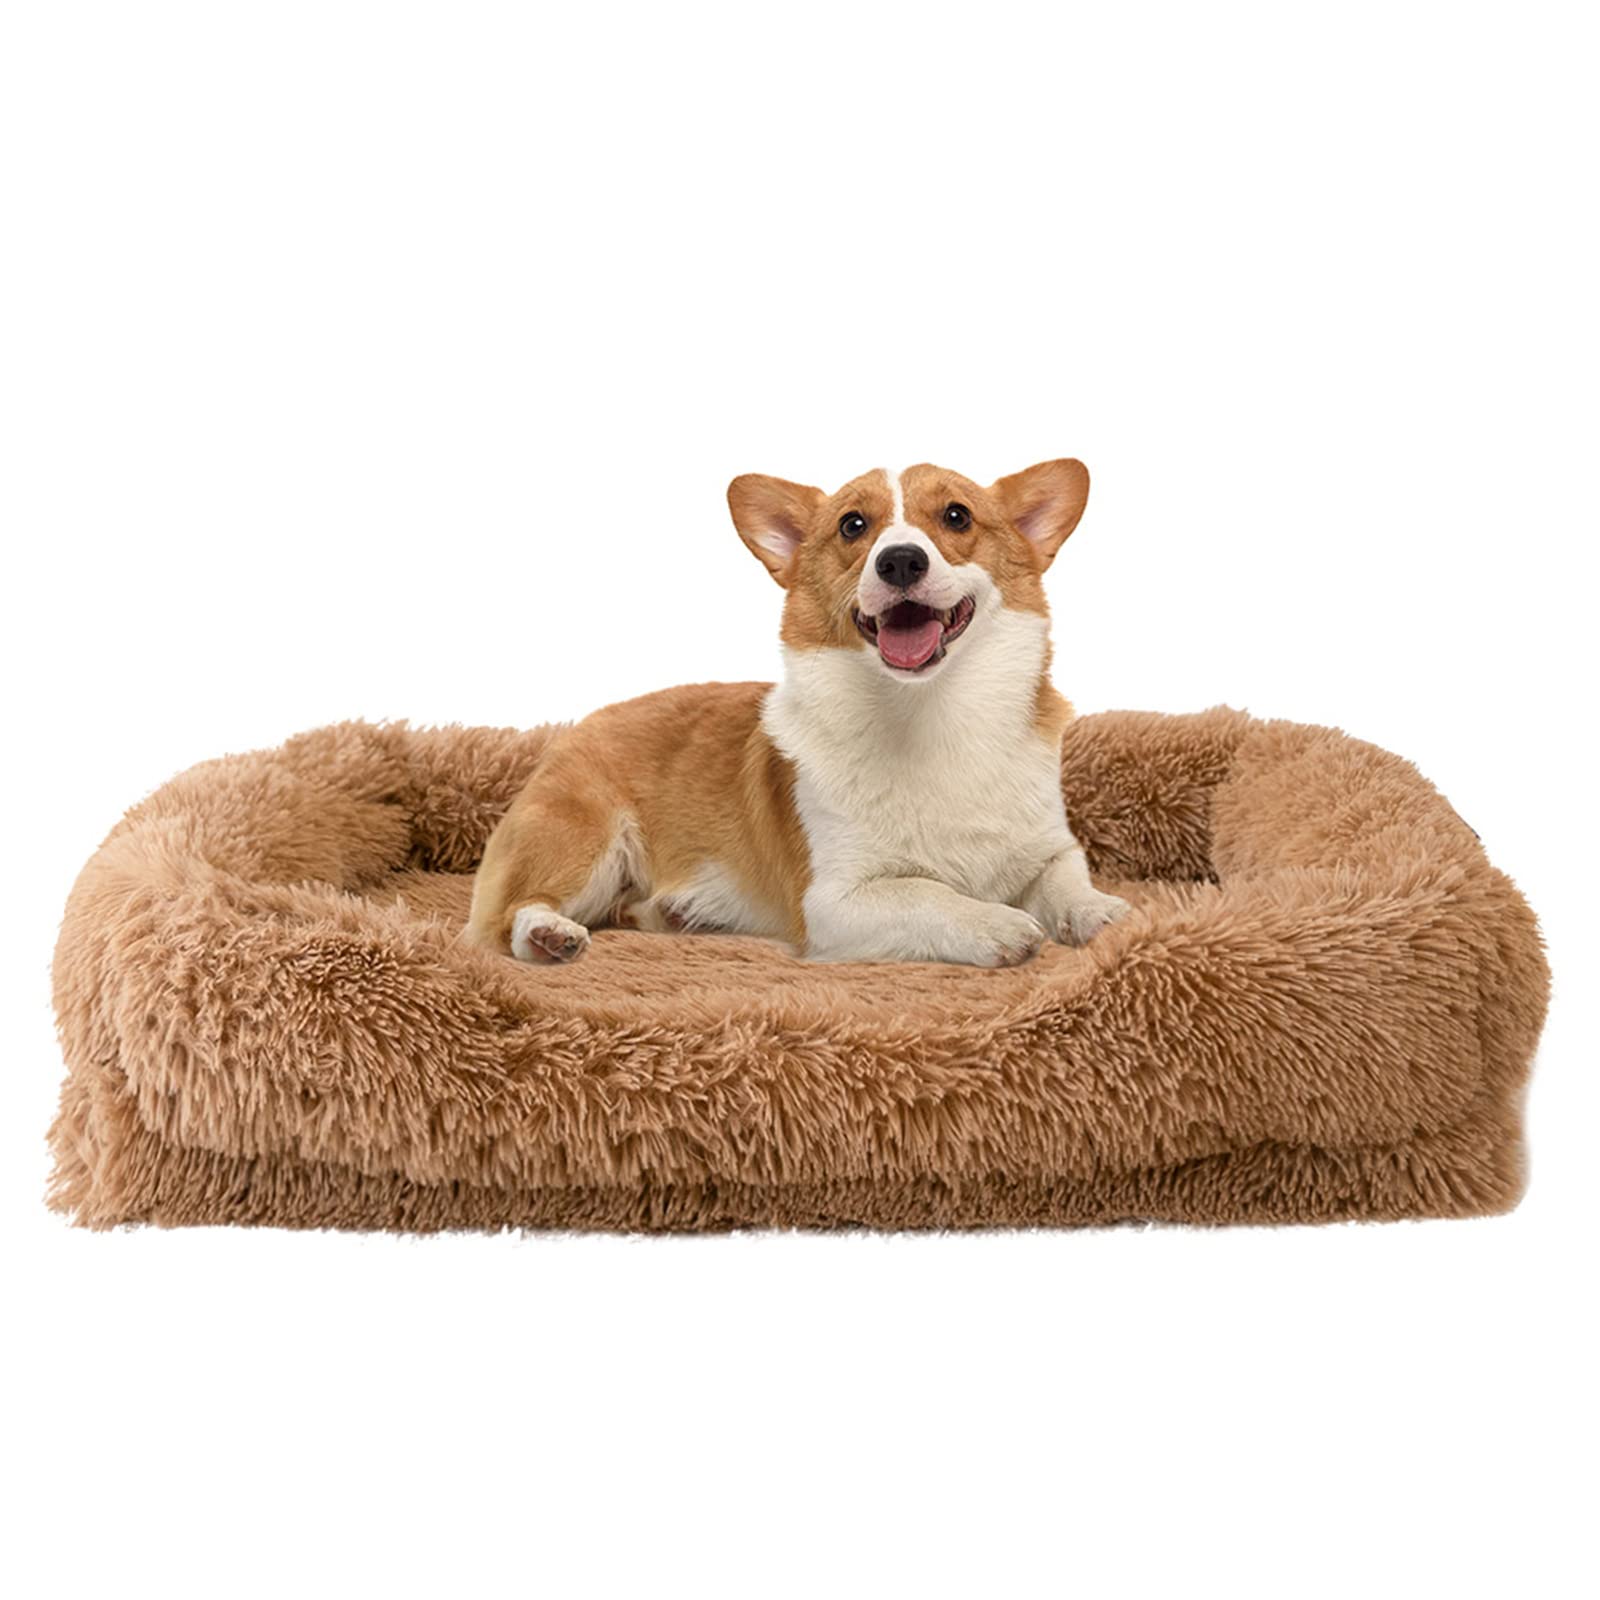 WELLYELO Medium Dog Bed Cat Bed Fluffy Plush Dog Crate Beds for Medium Dogs Anti-Slip Pet Bed Dog Crate Pad Sleeping Mat Machine